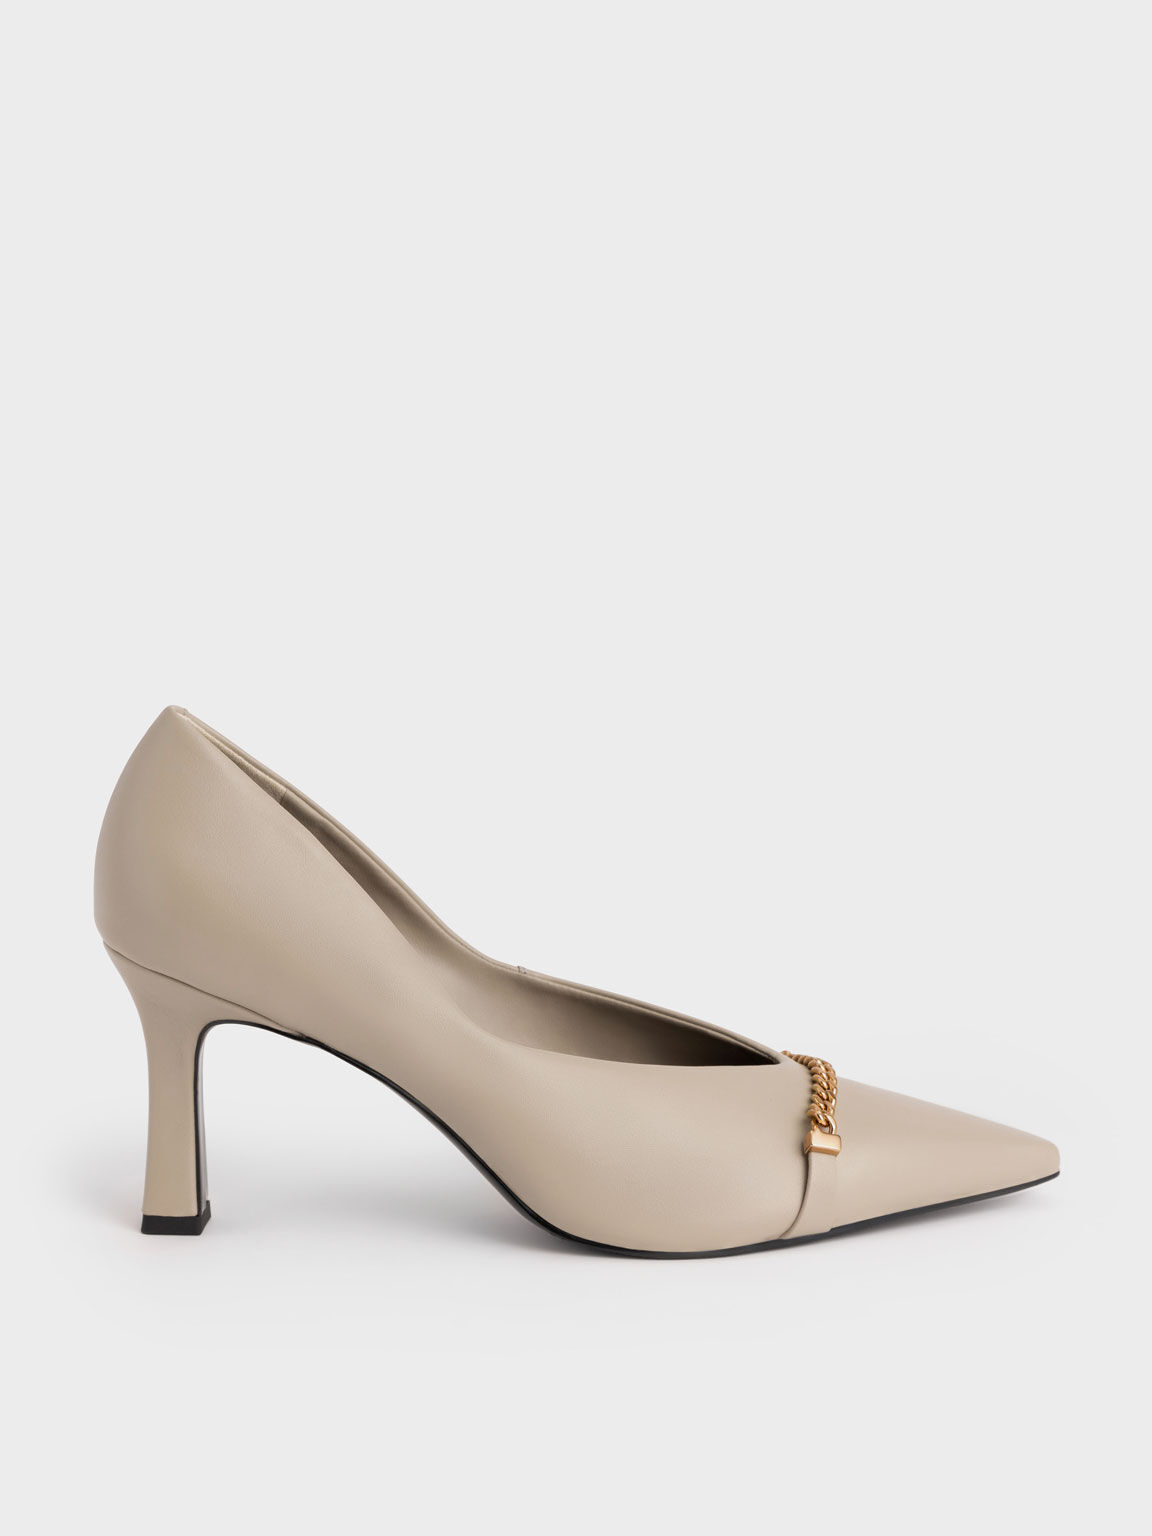 Chain Link D'Orsay Pumps, Taupe, hi-res